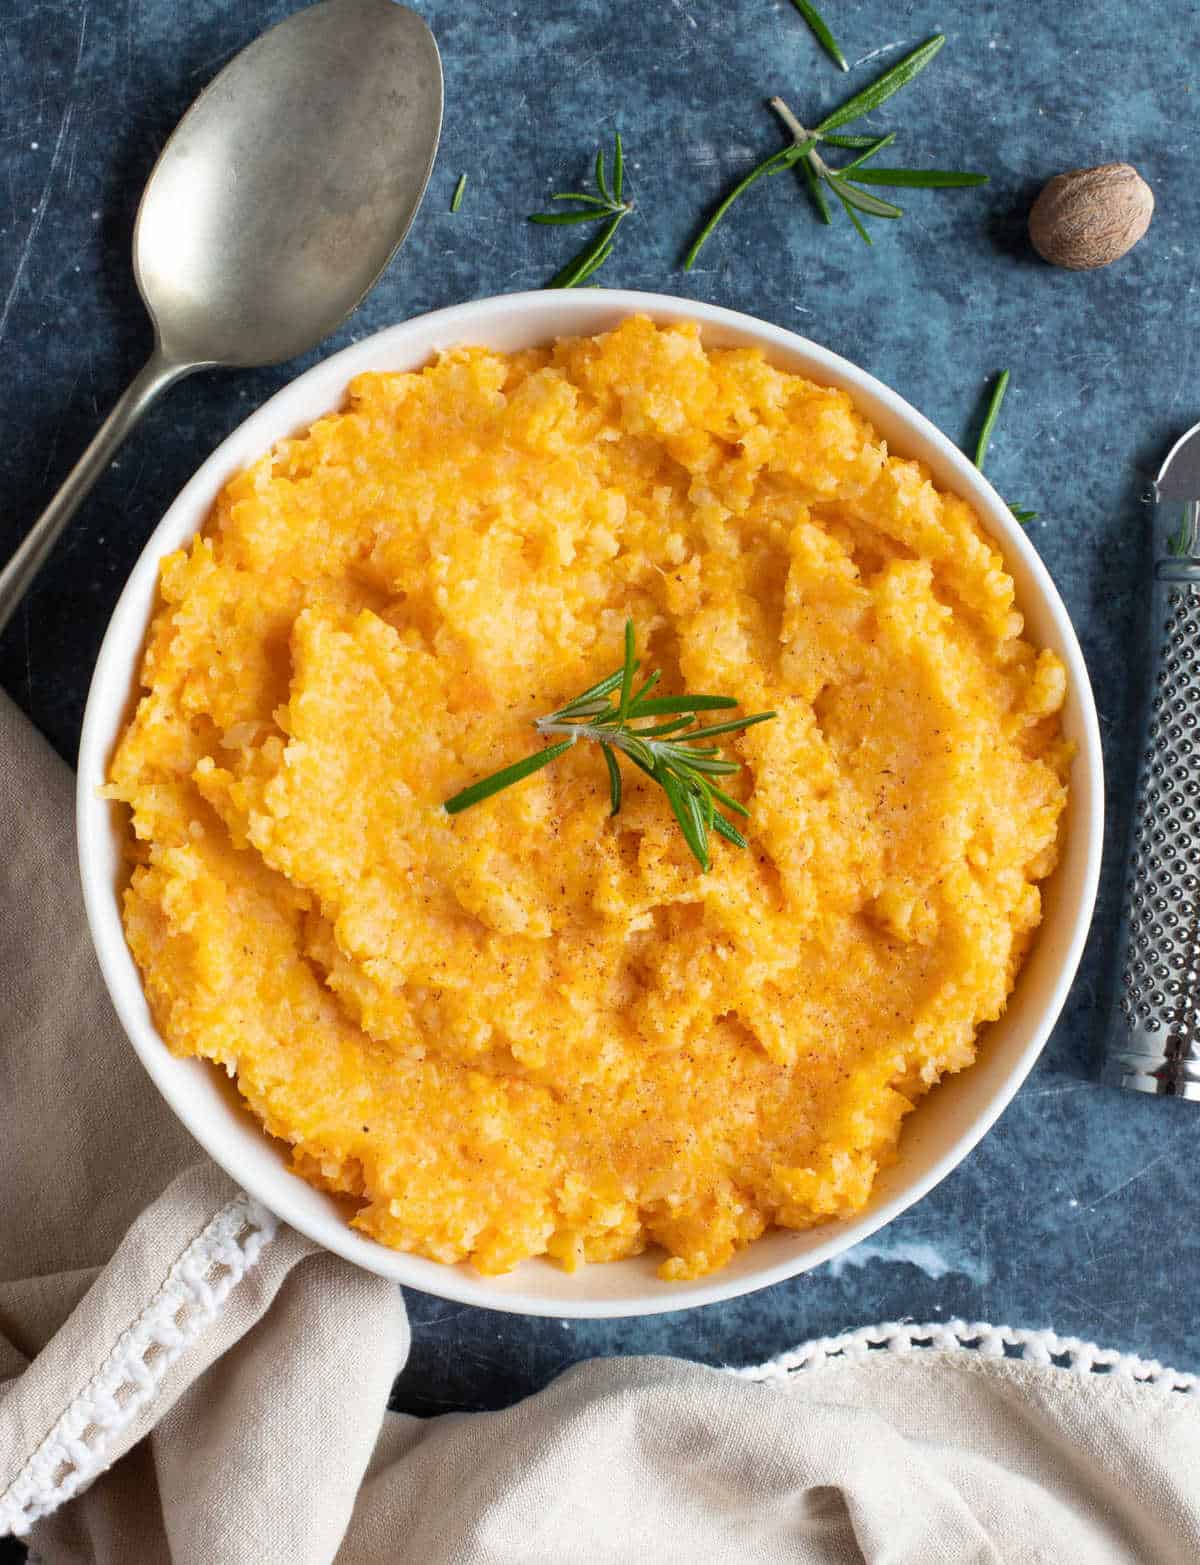 Carrot and rutabaga mash in a bowl.